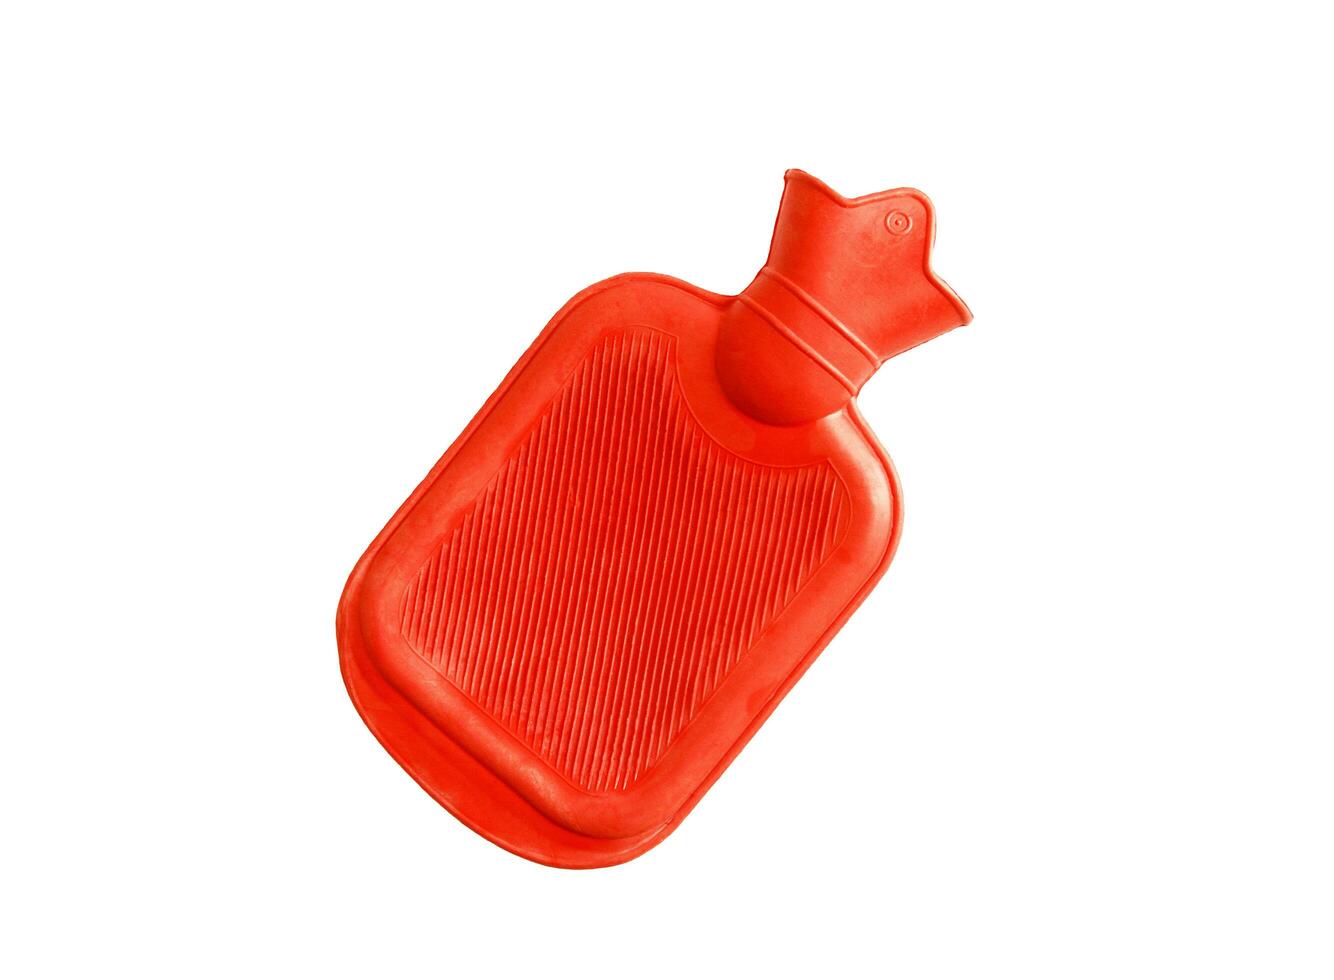 Orange rubber heat water bag or hot water bag isolated on white background with clipping path. This object for contain hot water for help to alleviate injury, stomach pain and make body warm. photo